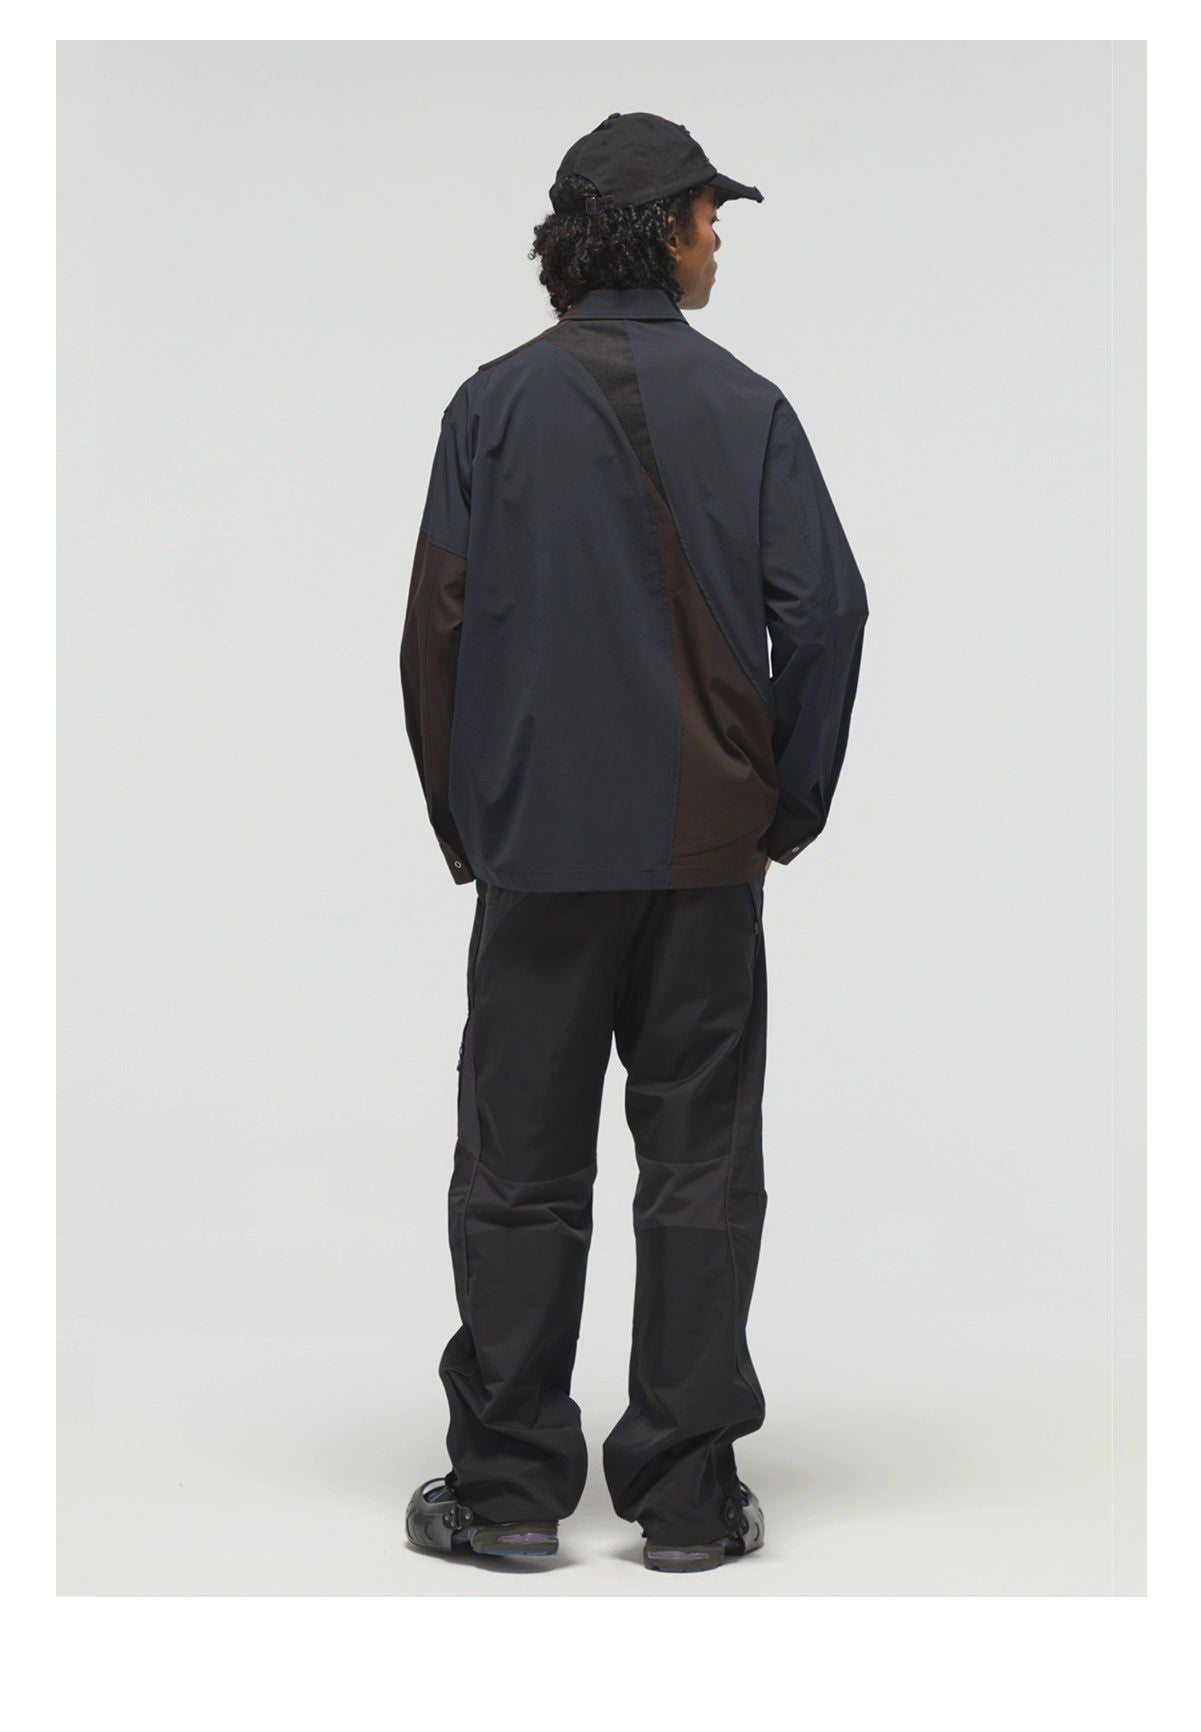 Splices Structured Track Pants Korean Street Fashion Pants By Decesolo Shop Online at OH Vault